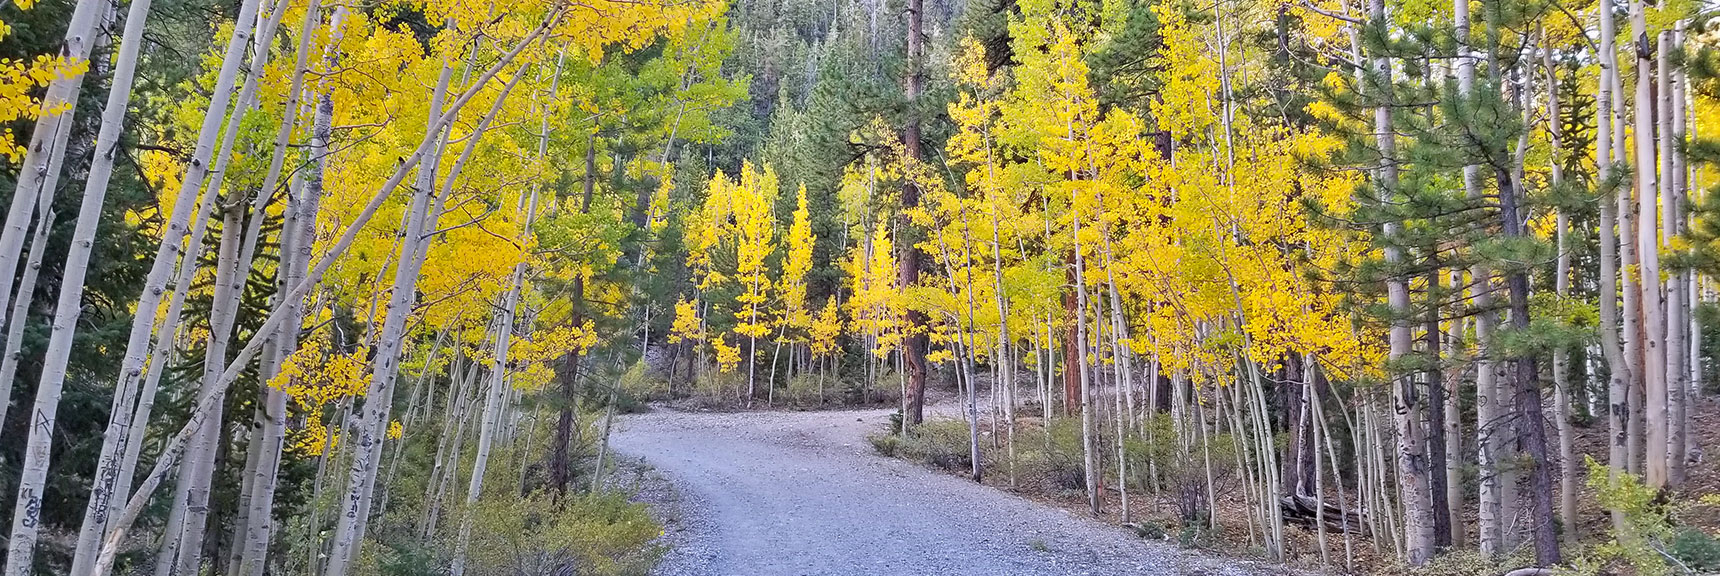 Colorful Fall Ash Trees on the Lower Bristlecone Pine Trail/Fire Road | Bonanza Peak from Lee Canyon via the Lower Bristlecone Pine Trail and Bonanza Trail | Spring Mountains, Nevada